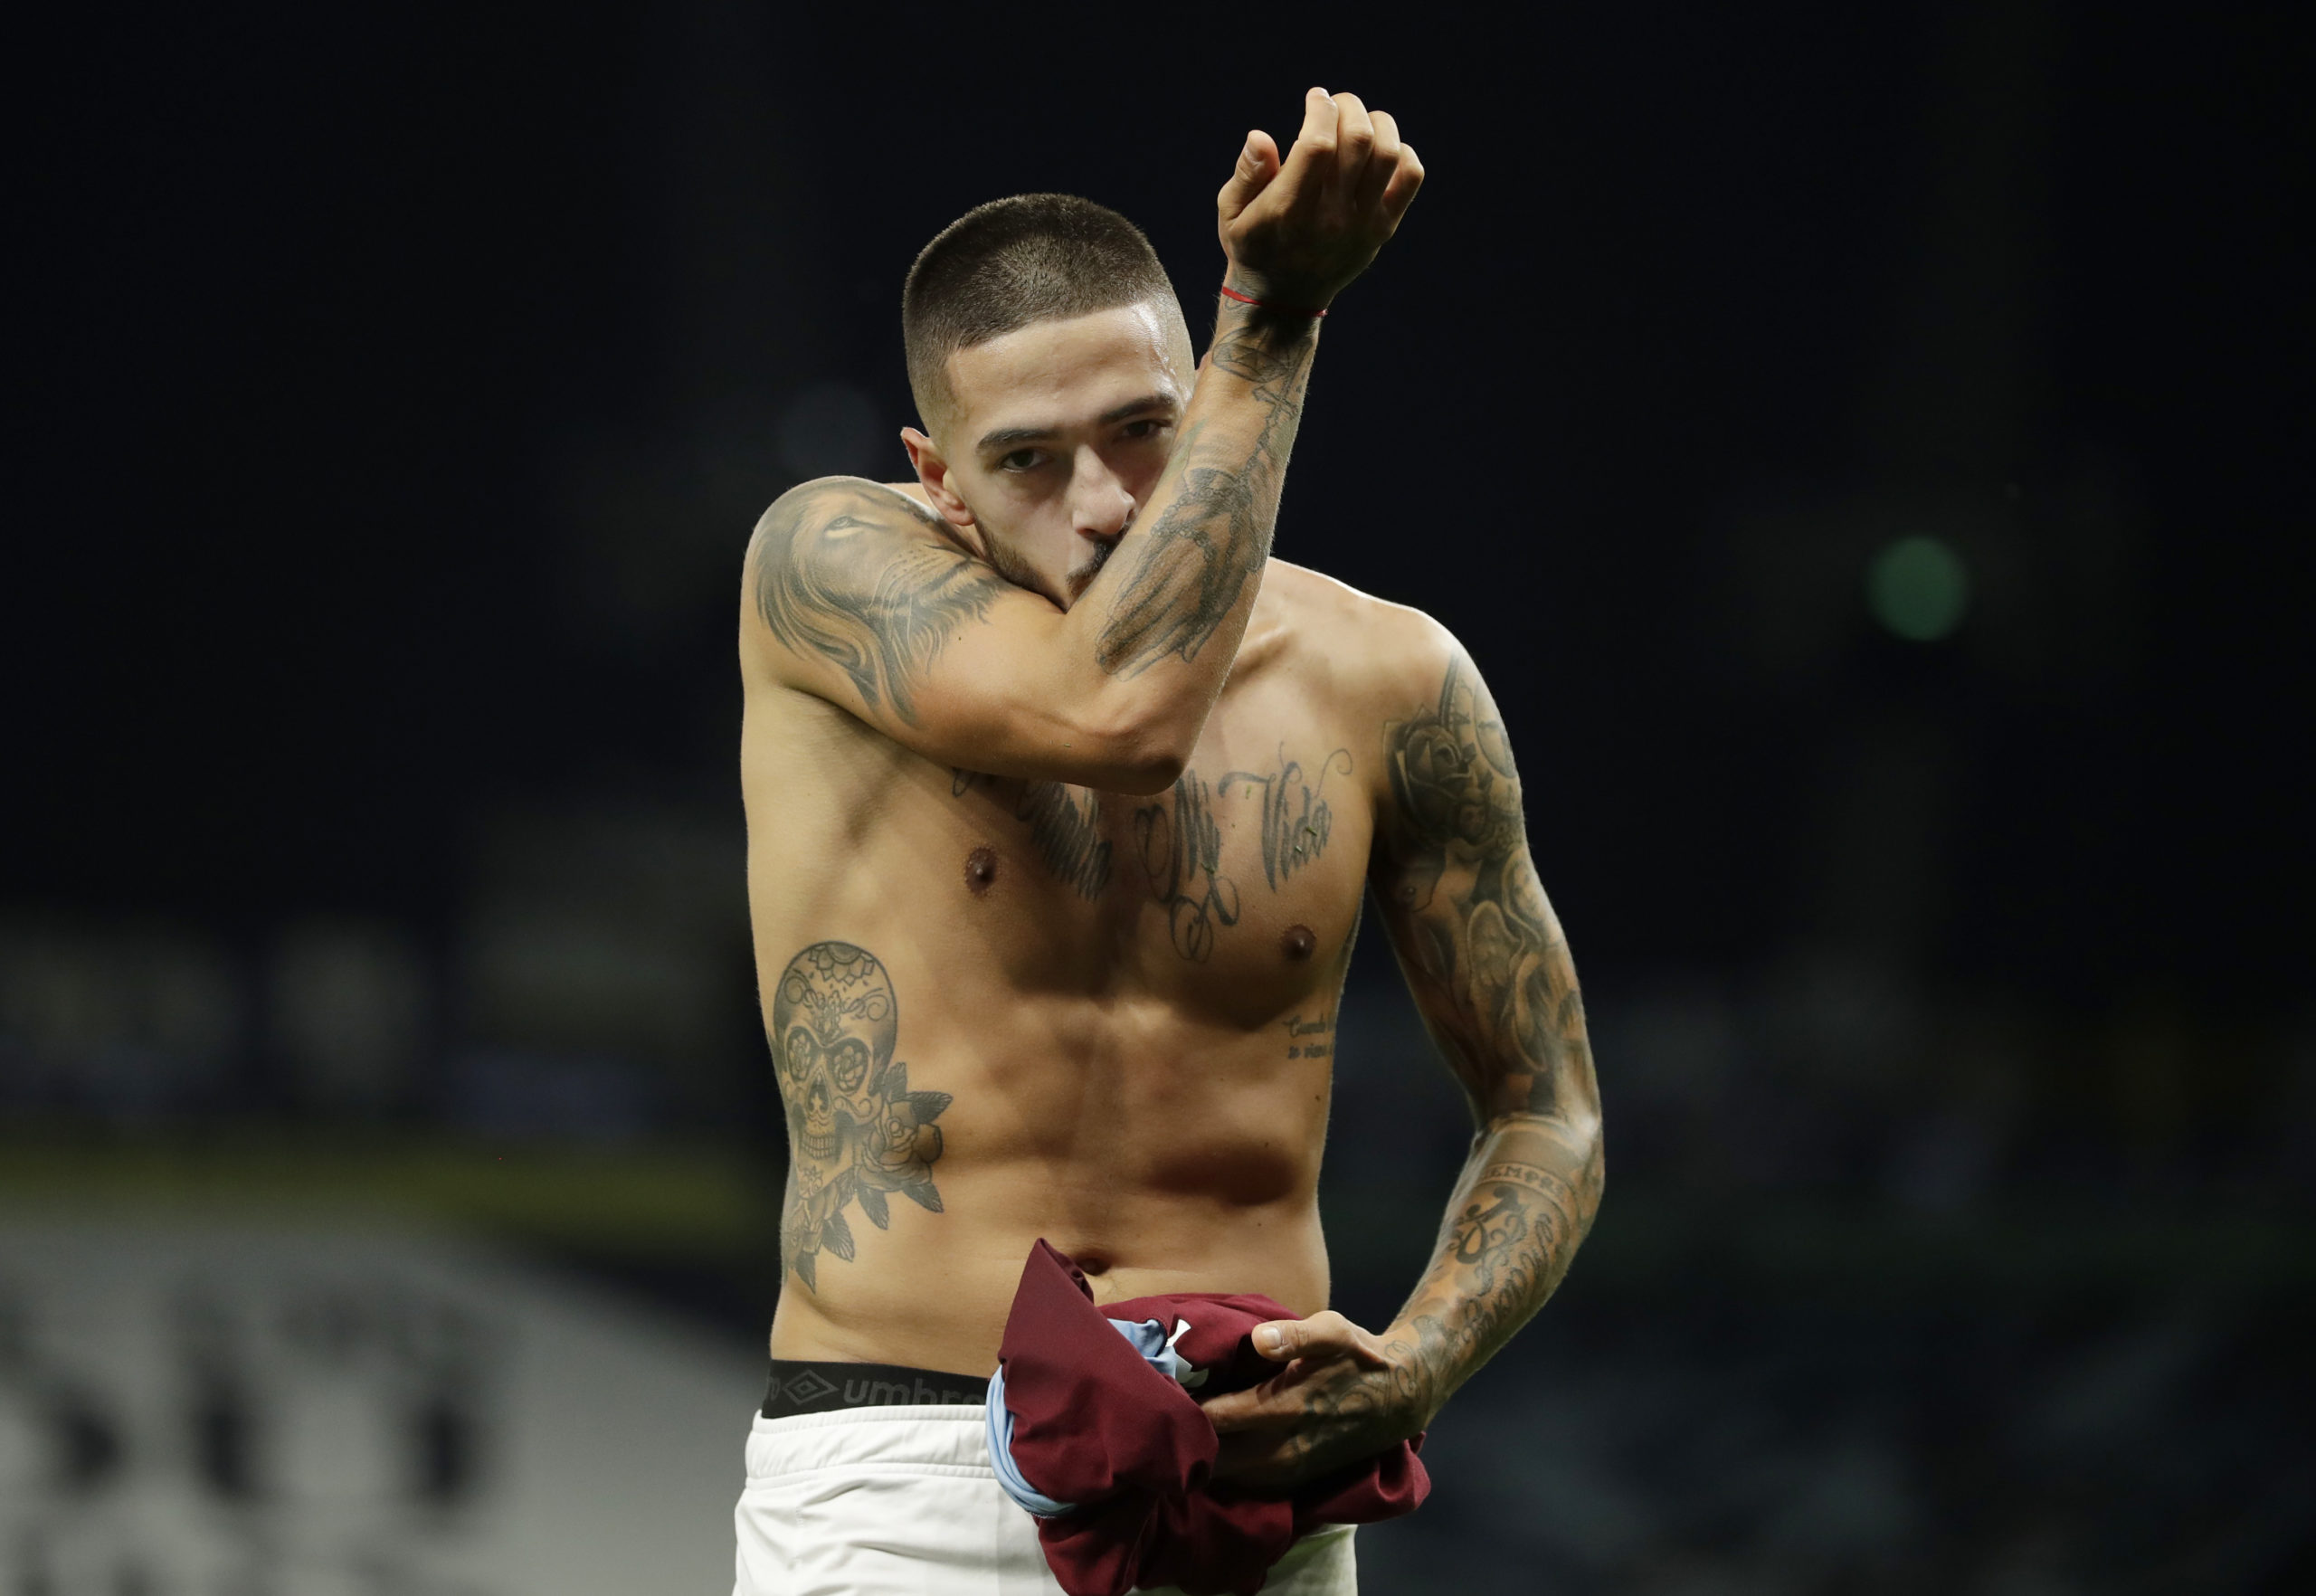 West Ham star Manuel Lanzini issues apology but it's really not necessary and he can make up for it against Sevilla